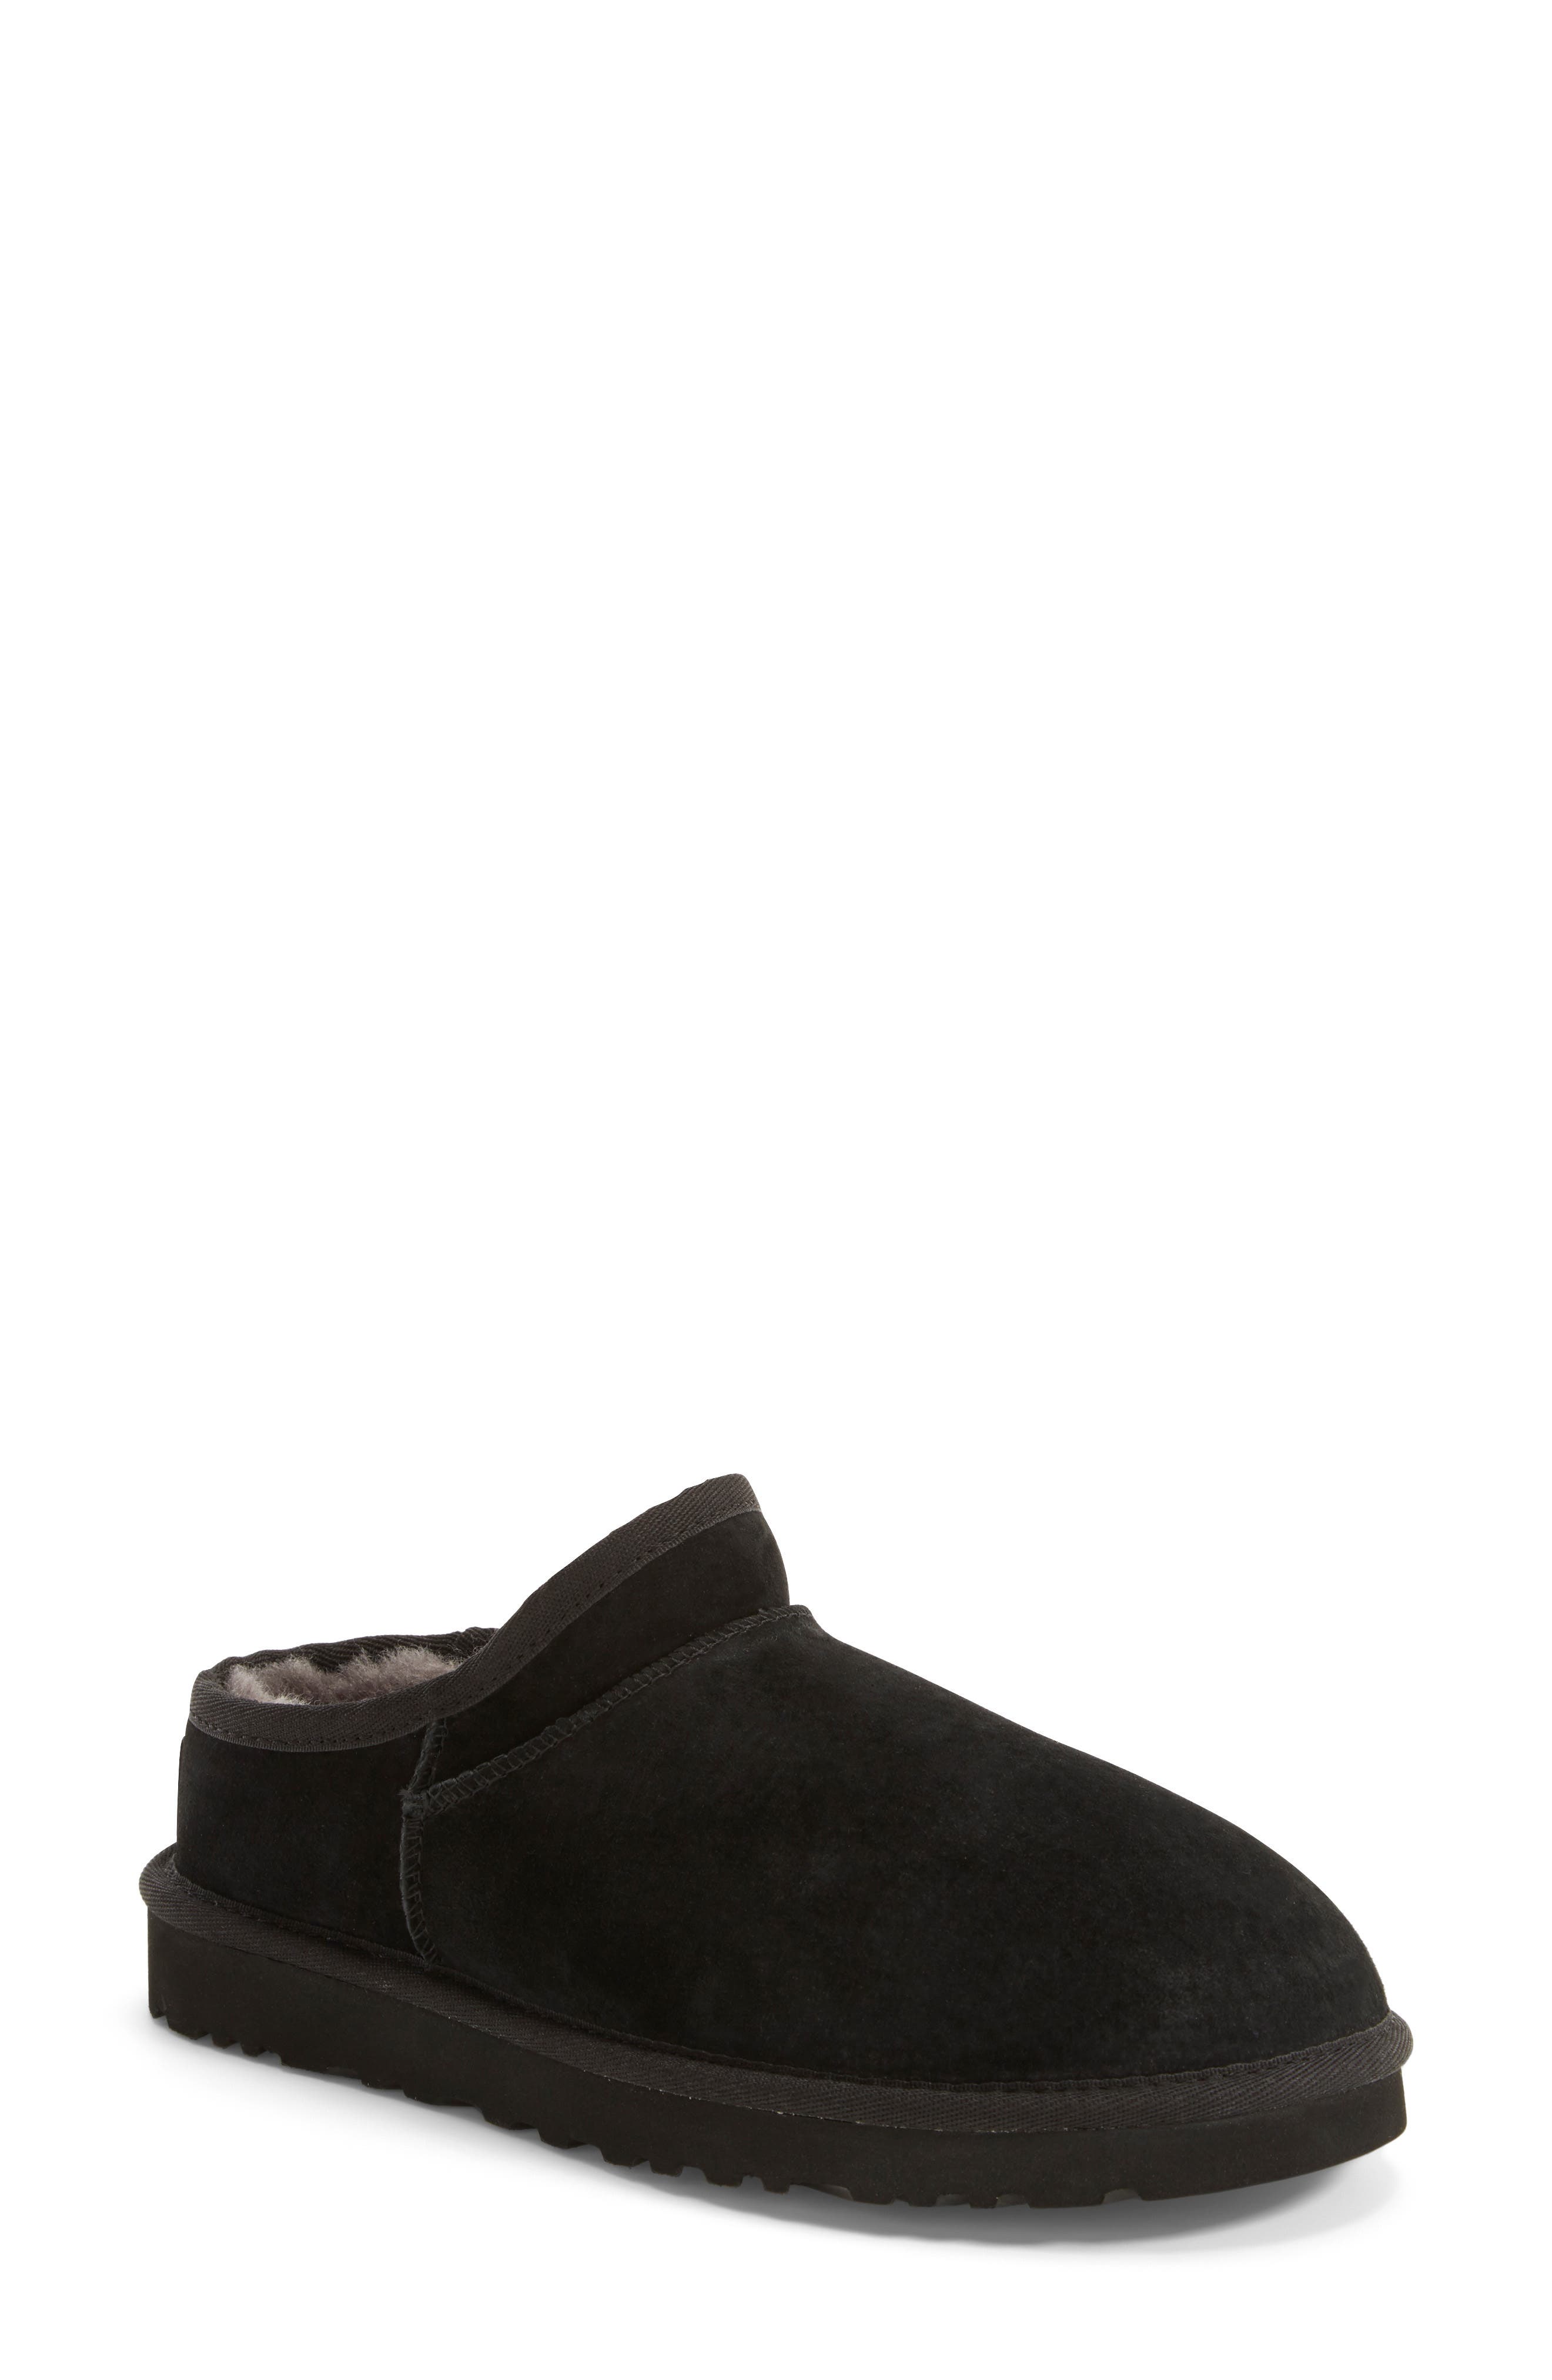 ugg classic water resistant slipper